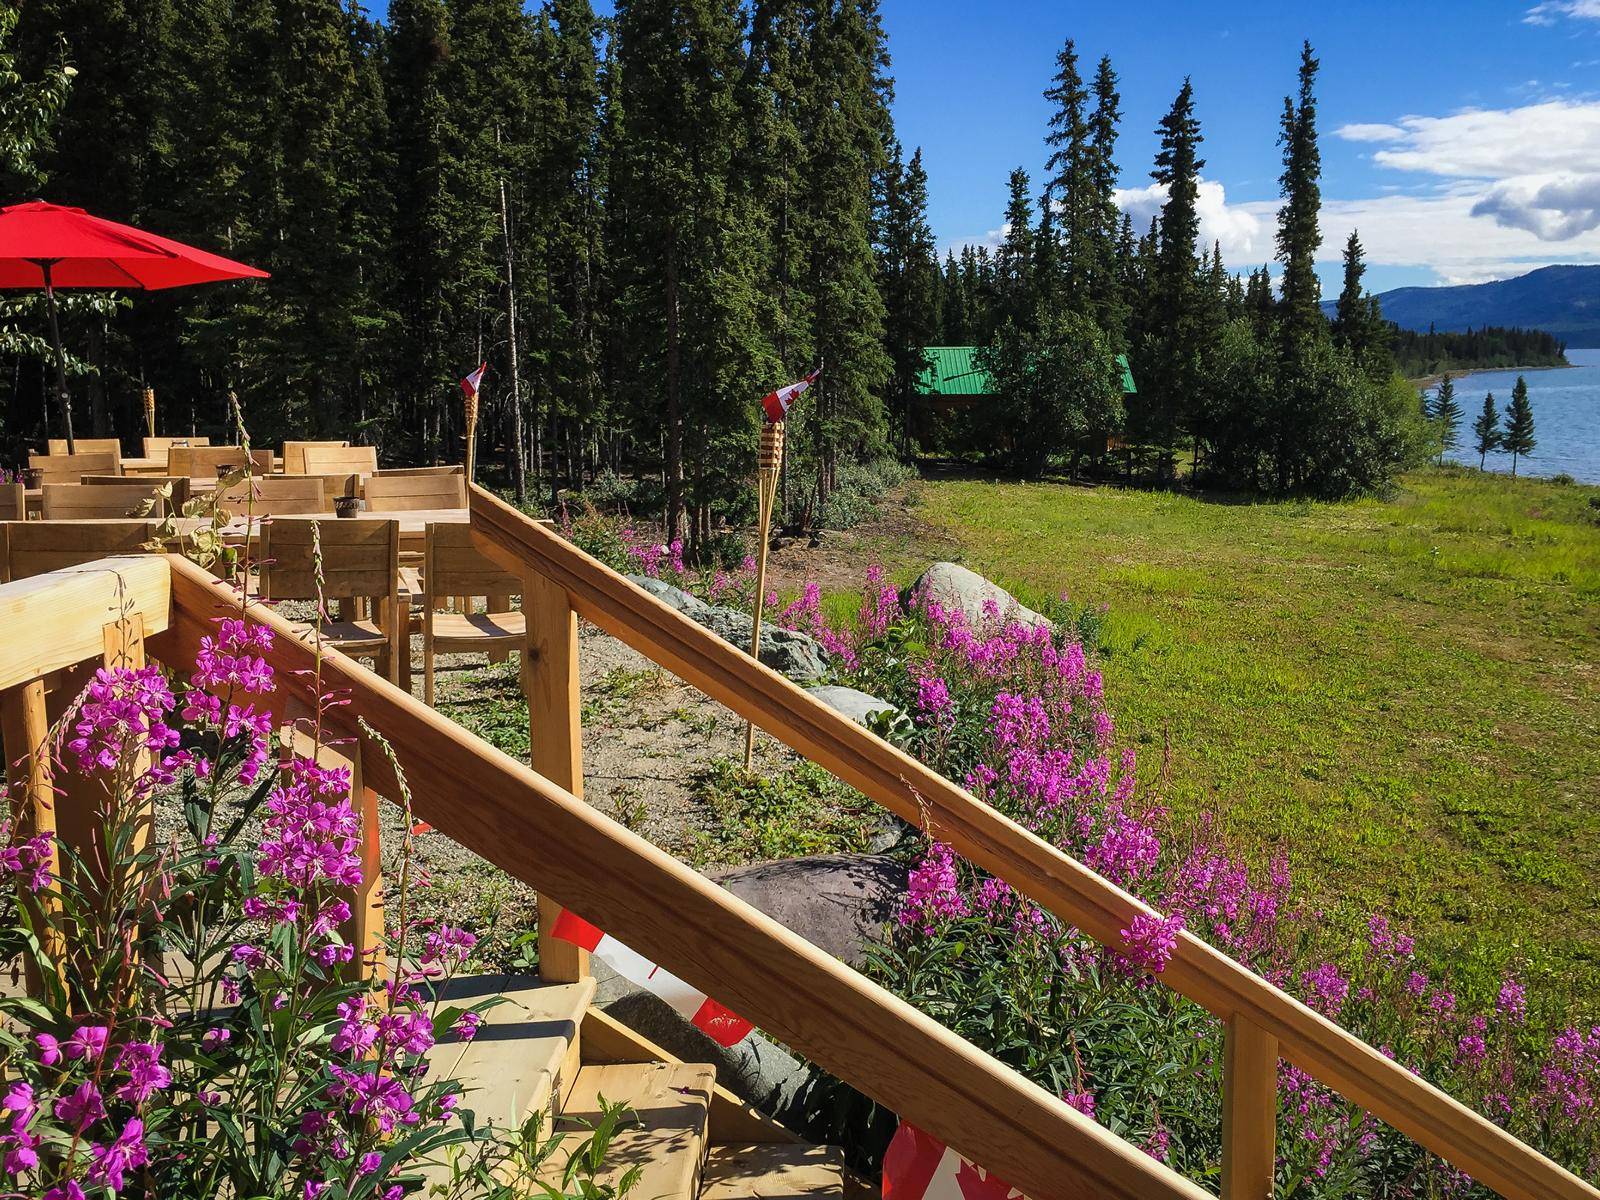 restaurant patio, pink flowers, cabins in background